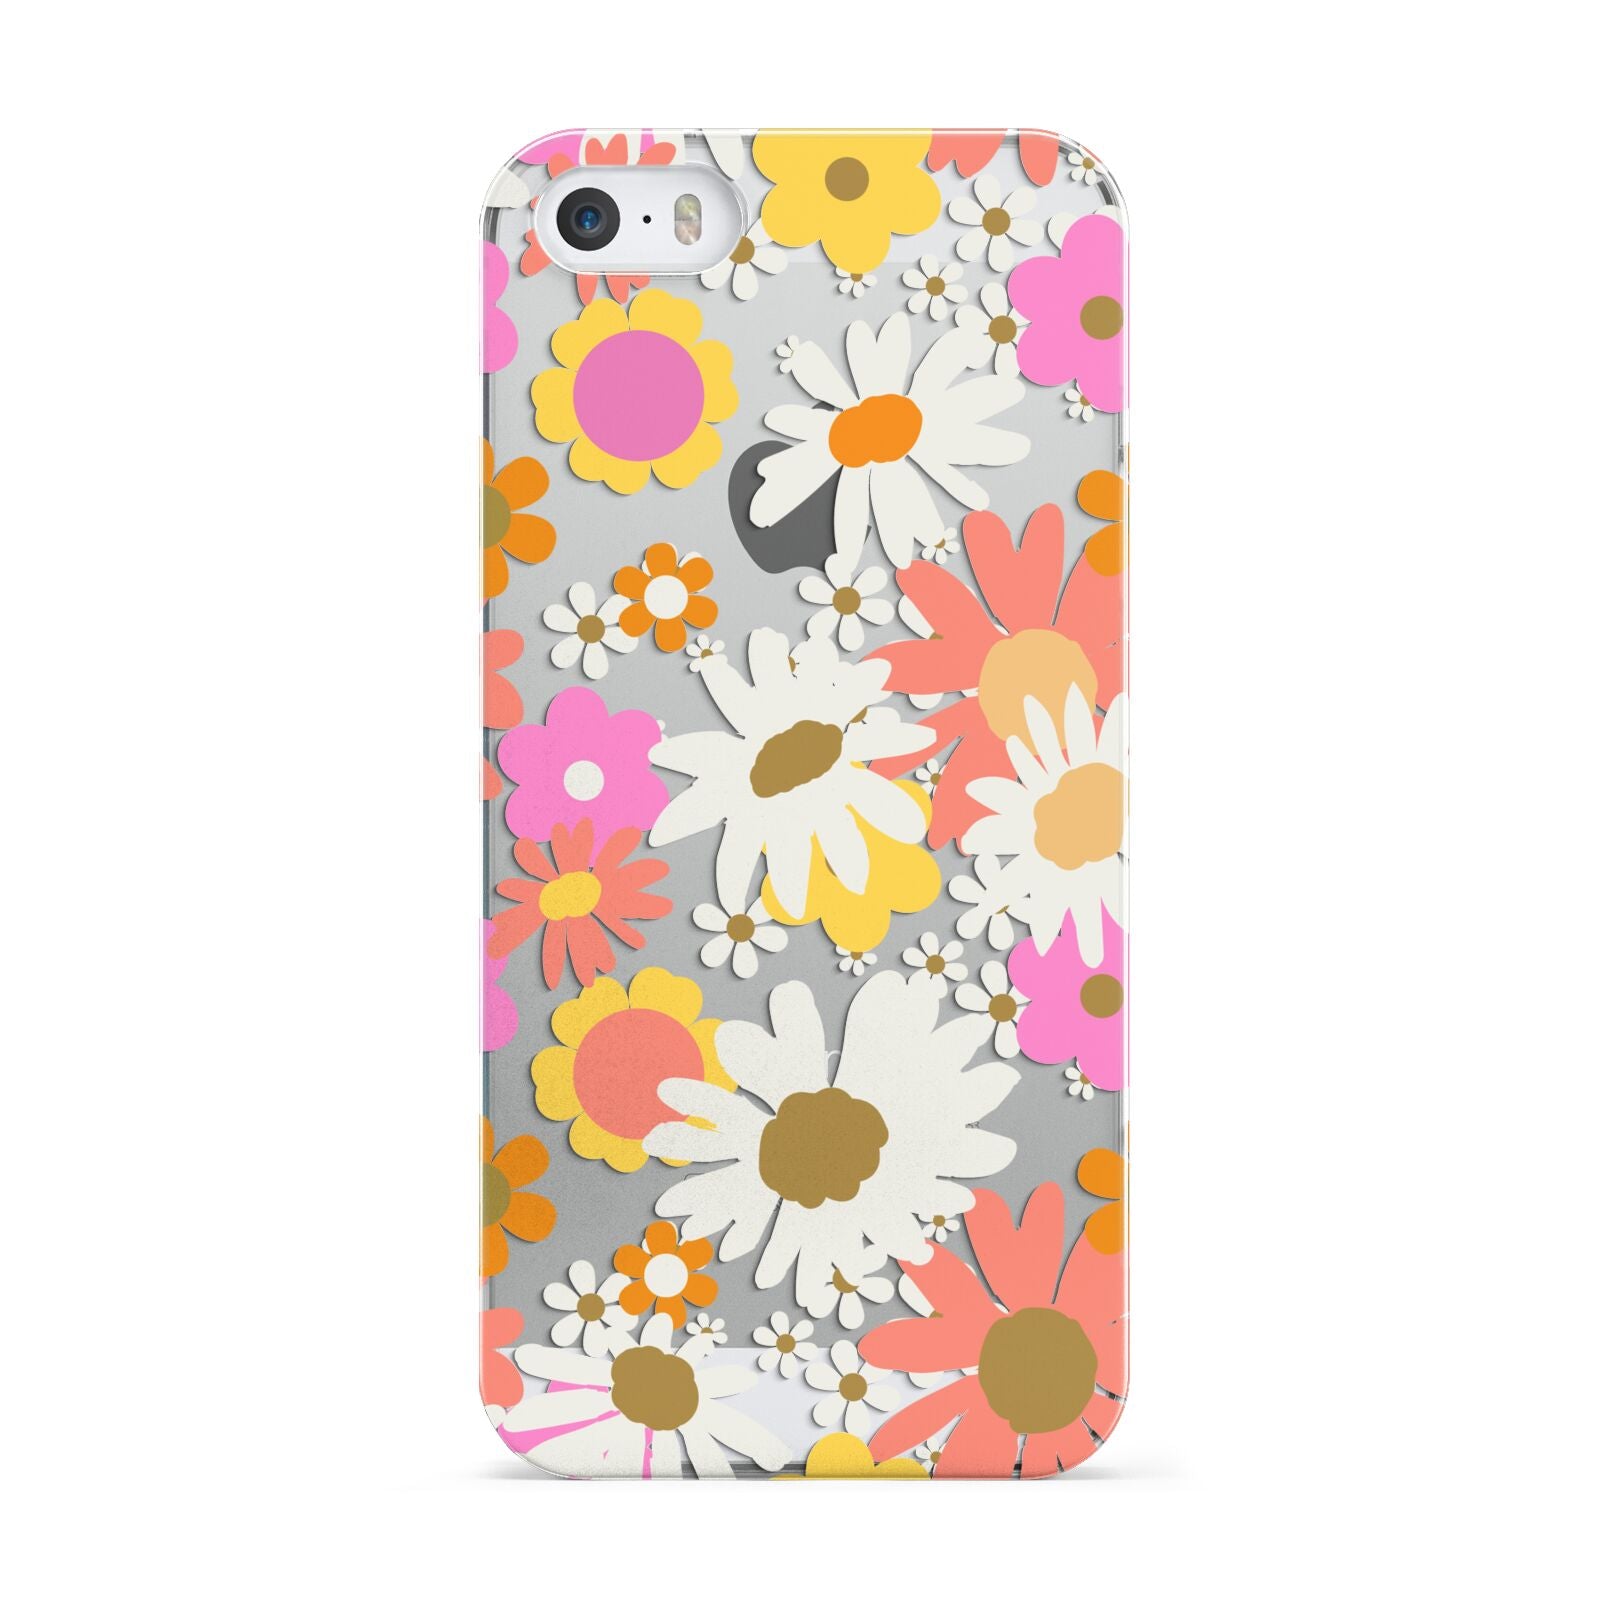 Seventies Floral Apple iPhone 5 Case